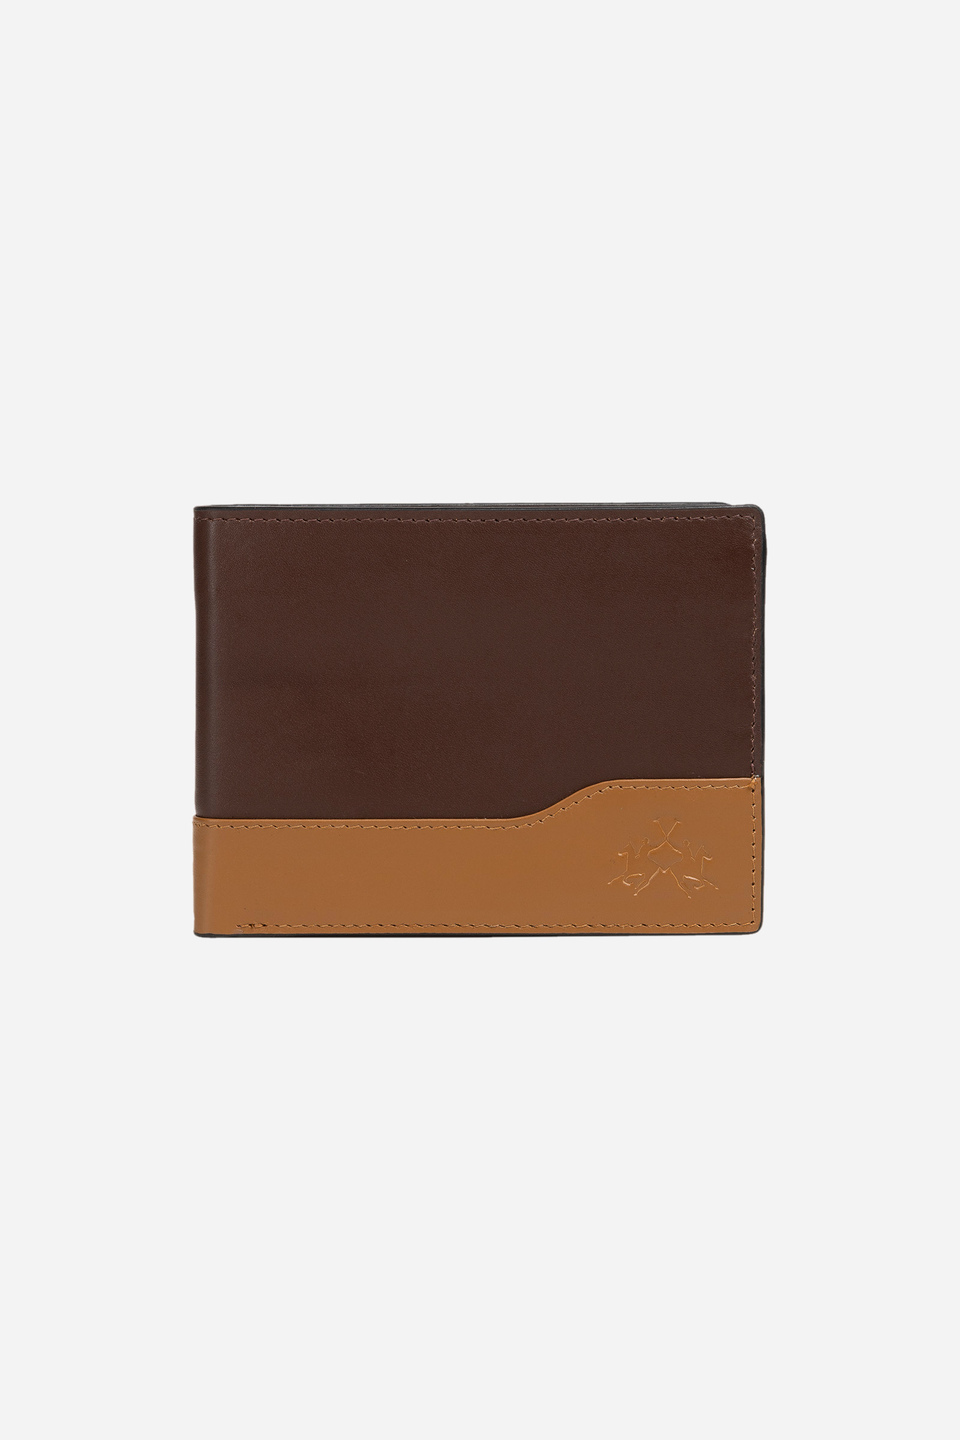 Personalized Money Clip Leather Wallet - Basic | Swanky Badger